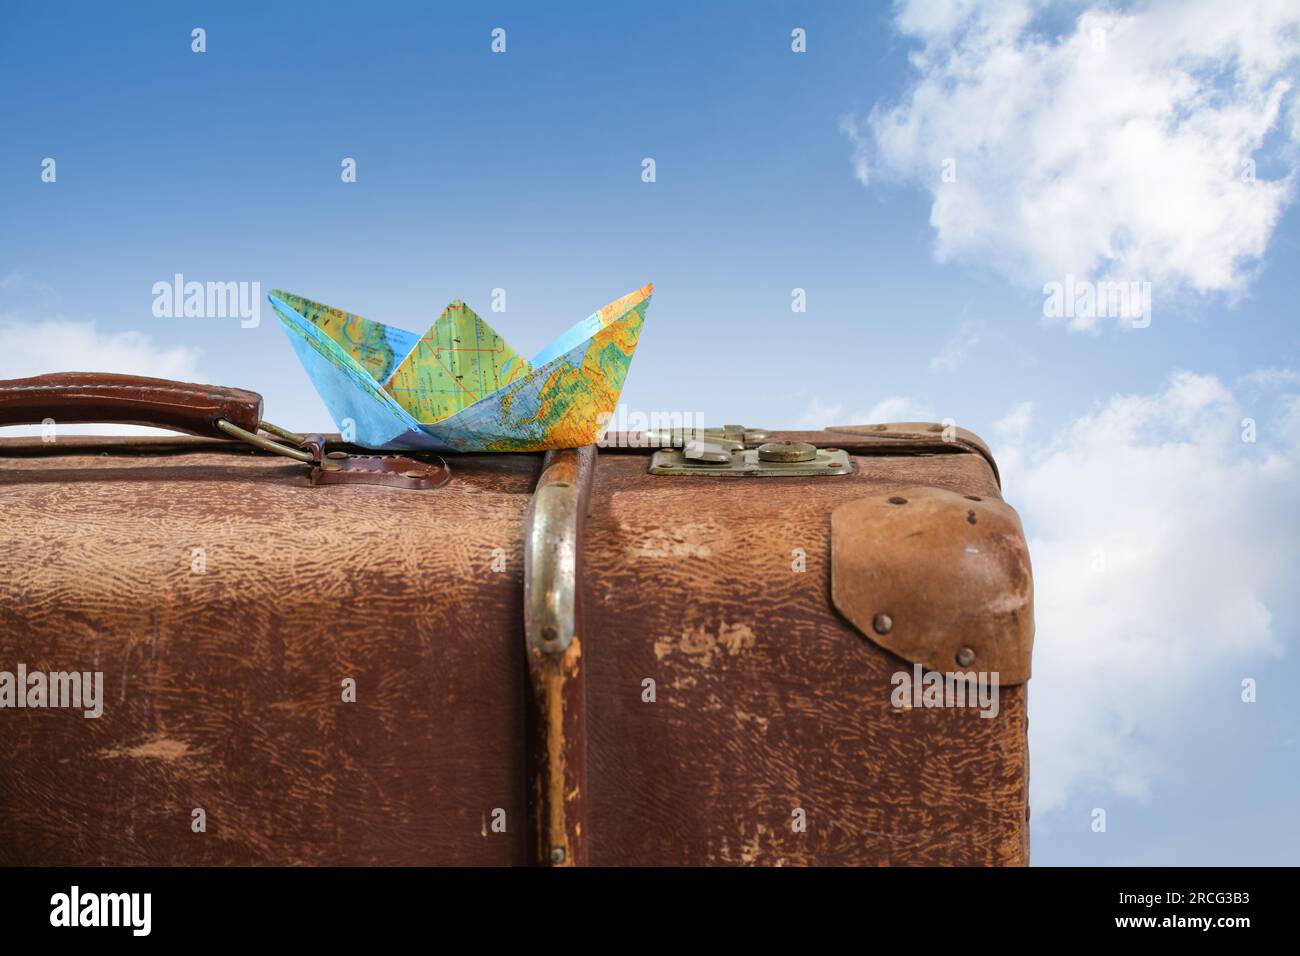 Paper boat folded from a map on an old vintage suitcase against a blue sky with white clouds, wanderlust, cruise and travel concept, copy space, selec Stock Photo